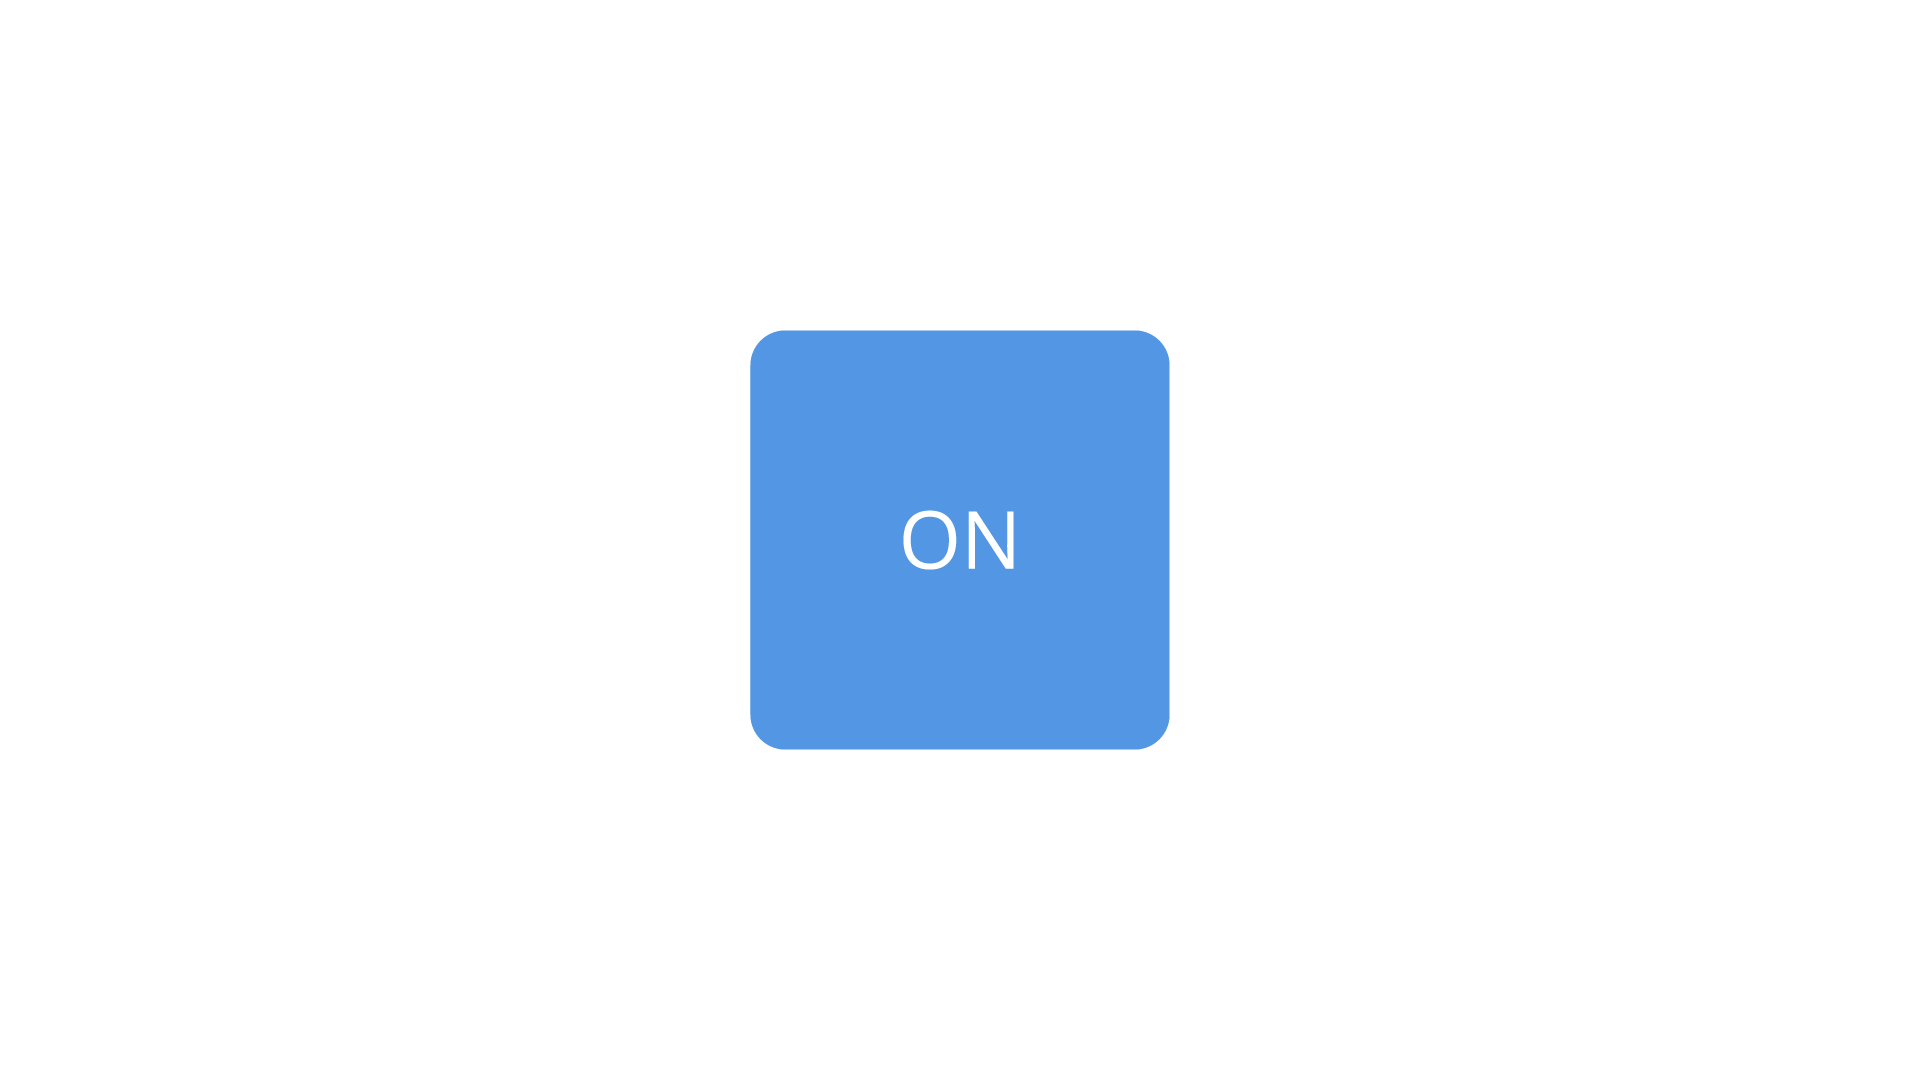 ../../_images/toggle-button.gif